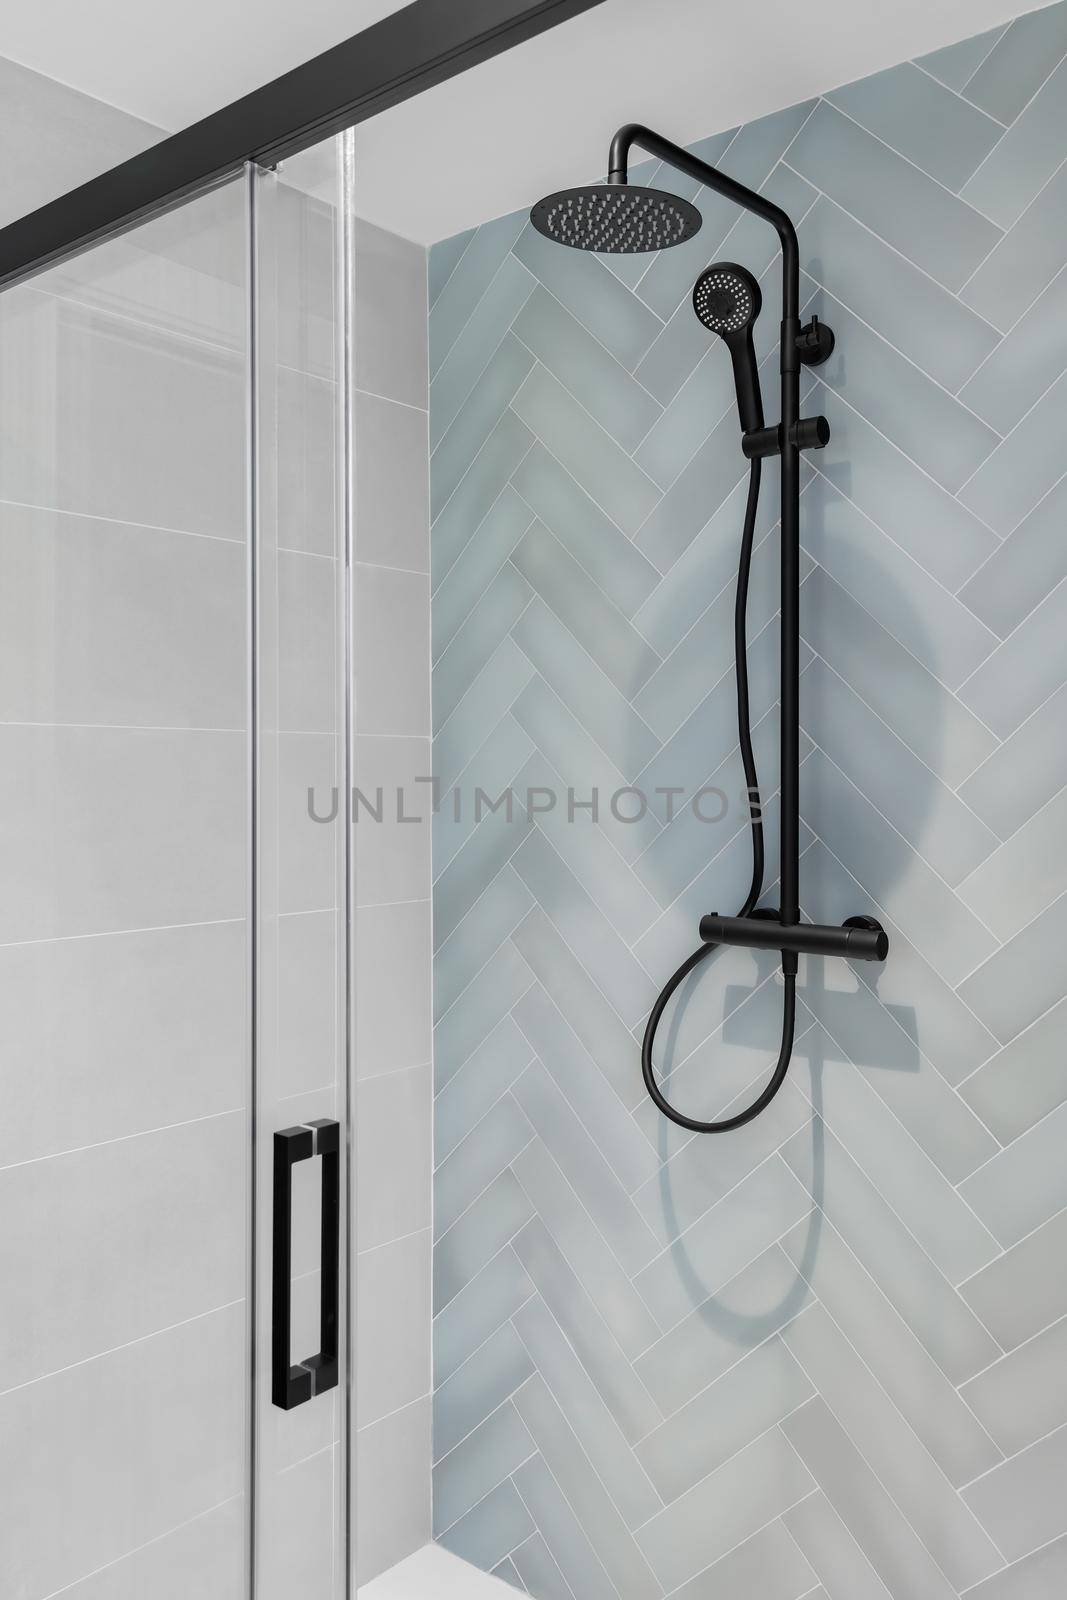 Modern shower zone with rain head, hand held shower and glass door. Light blue and white tiles in the bathroom by apavlin